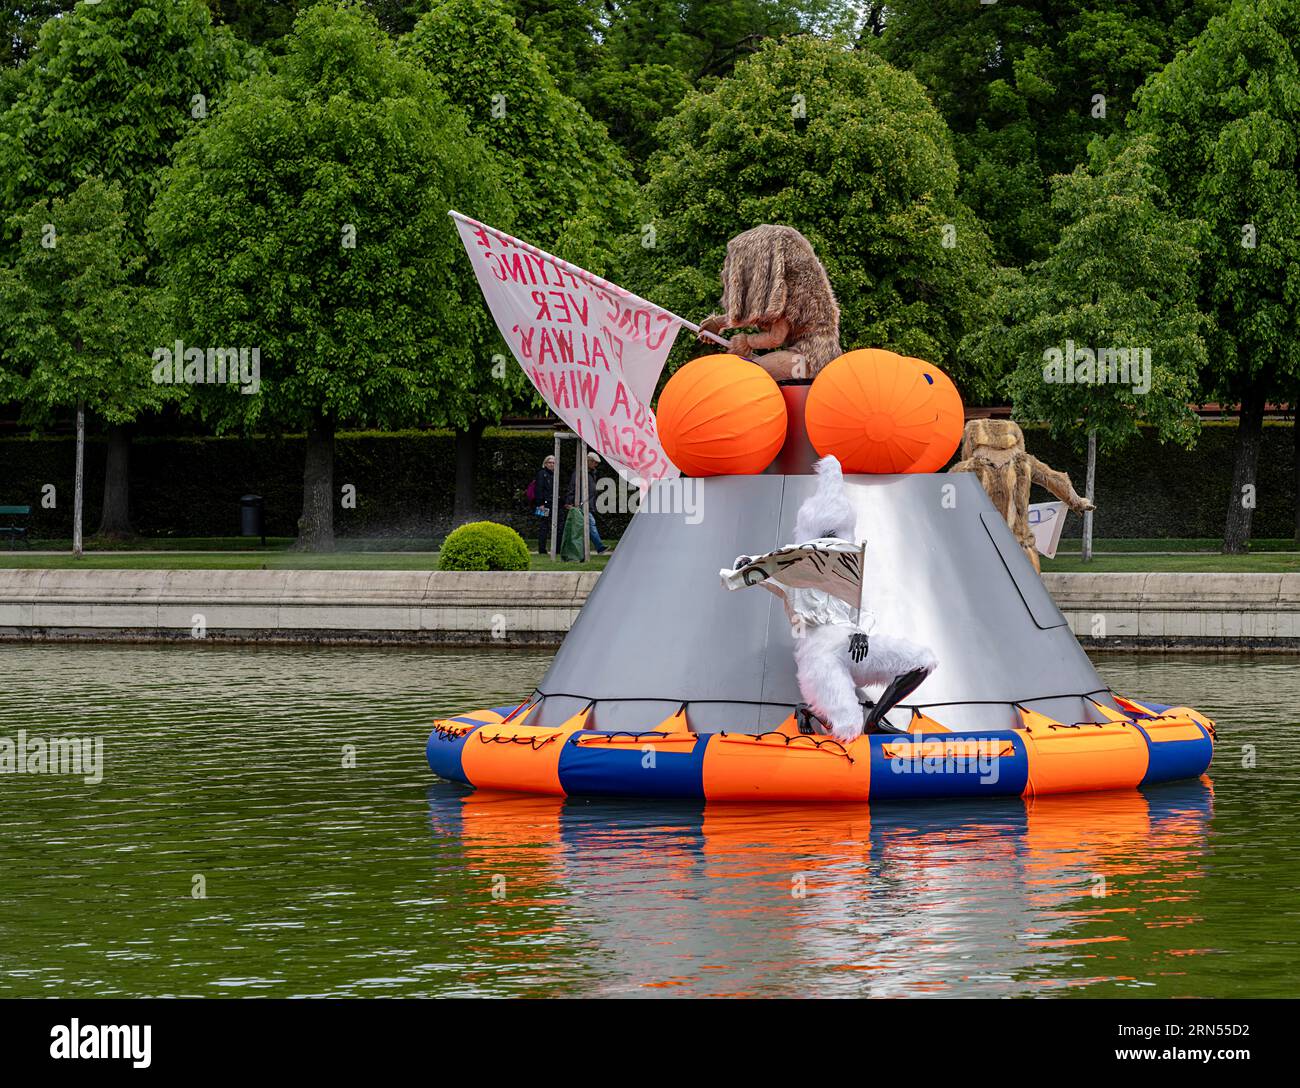 Belvedere Vienna, Public Matters Artworks, Goshka Macuga Space Capsule on Water Surface, Exhibition in the Palace Park, Vienna, Austria Stock Photo